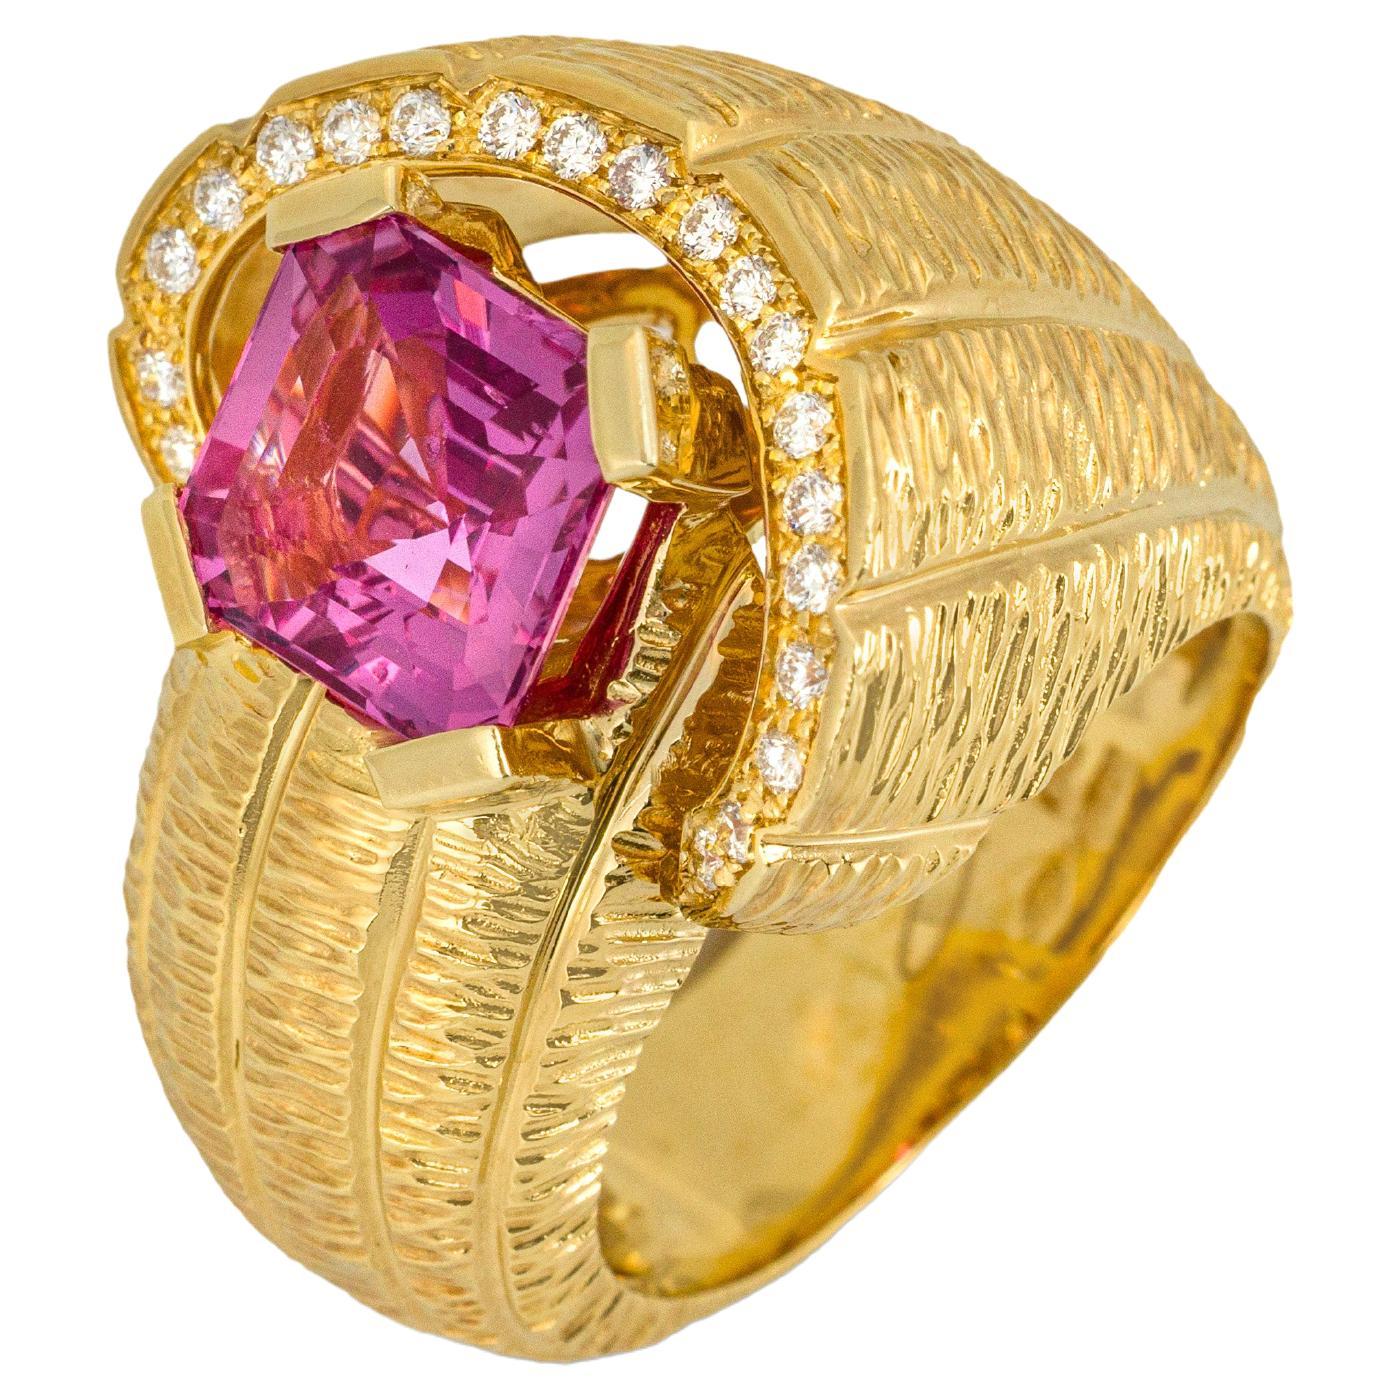 "Costis" Snail Shell Ring with Unheated Cushion Pink Sapphire of 4.15 Carats For Sale